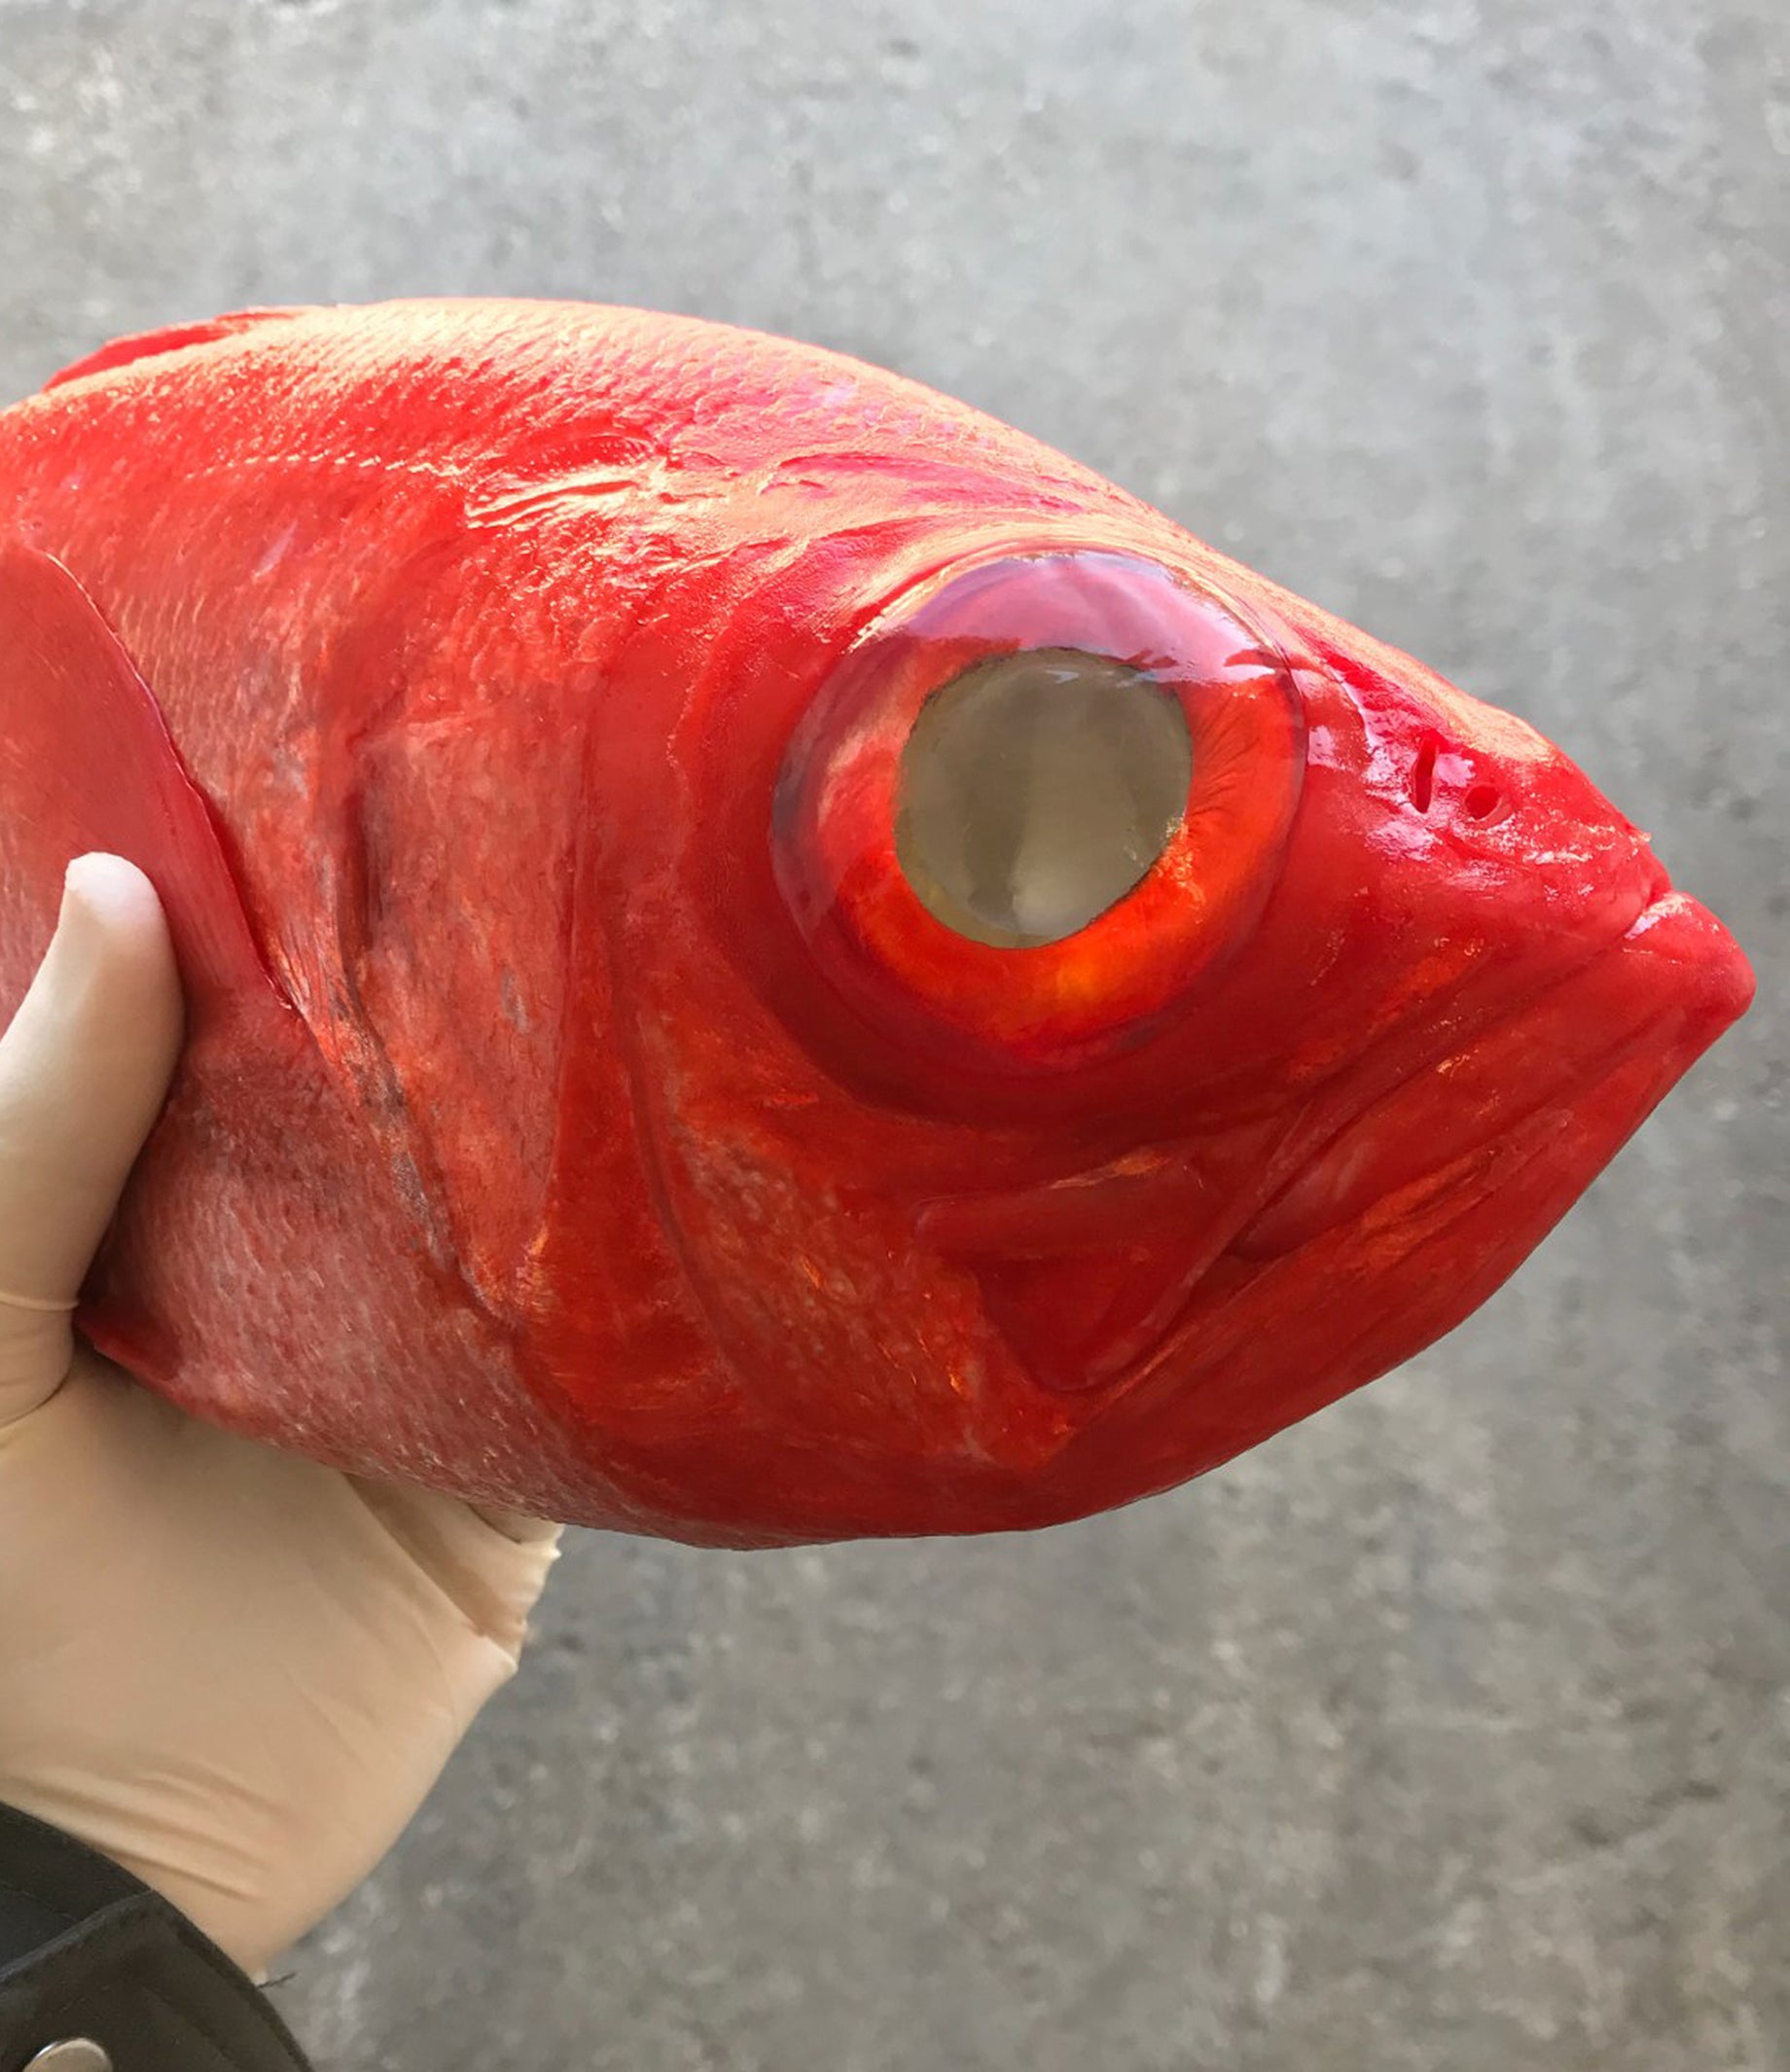 Old Florida Fish House - Sushi Special! 🤩 Just in! Jo Kinmedai Aka Golden  Eye Snapper Flown in straight from Japan! 🐟🇯🇵 Kinmedai's flesh is  delicate and tender, with good fat content